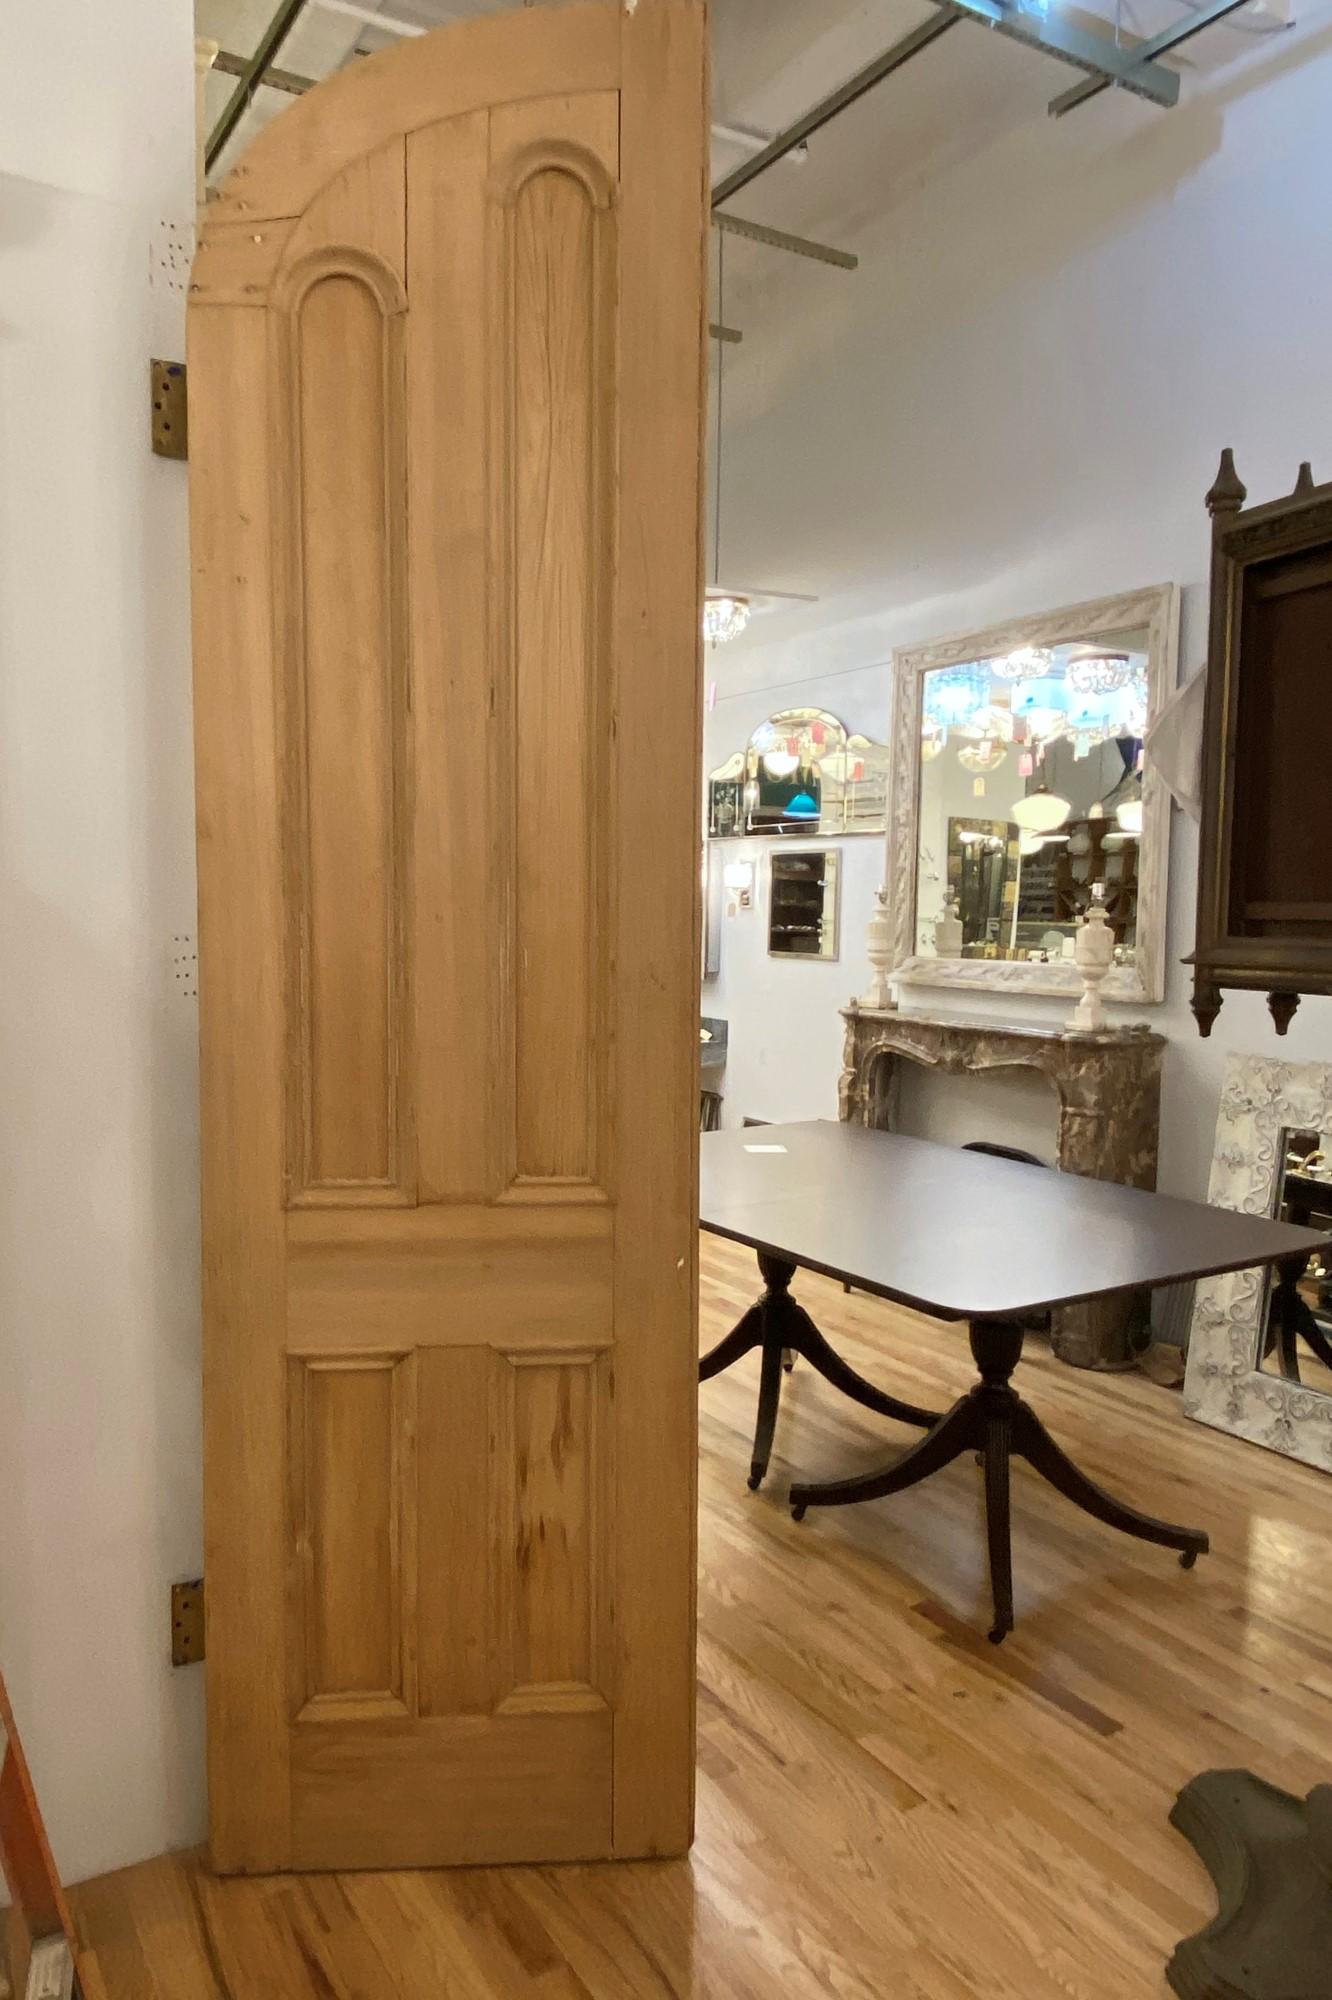 Late 19th century pair of arched pine parlor doors. These feature 4 flat vertical panels on each door side. These have been stripped. This can be seen at our 333 west 52nd St location in the Theater district west of Manhattan. Measures: 107.5 in. L